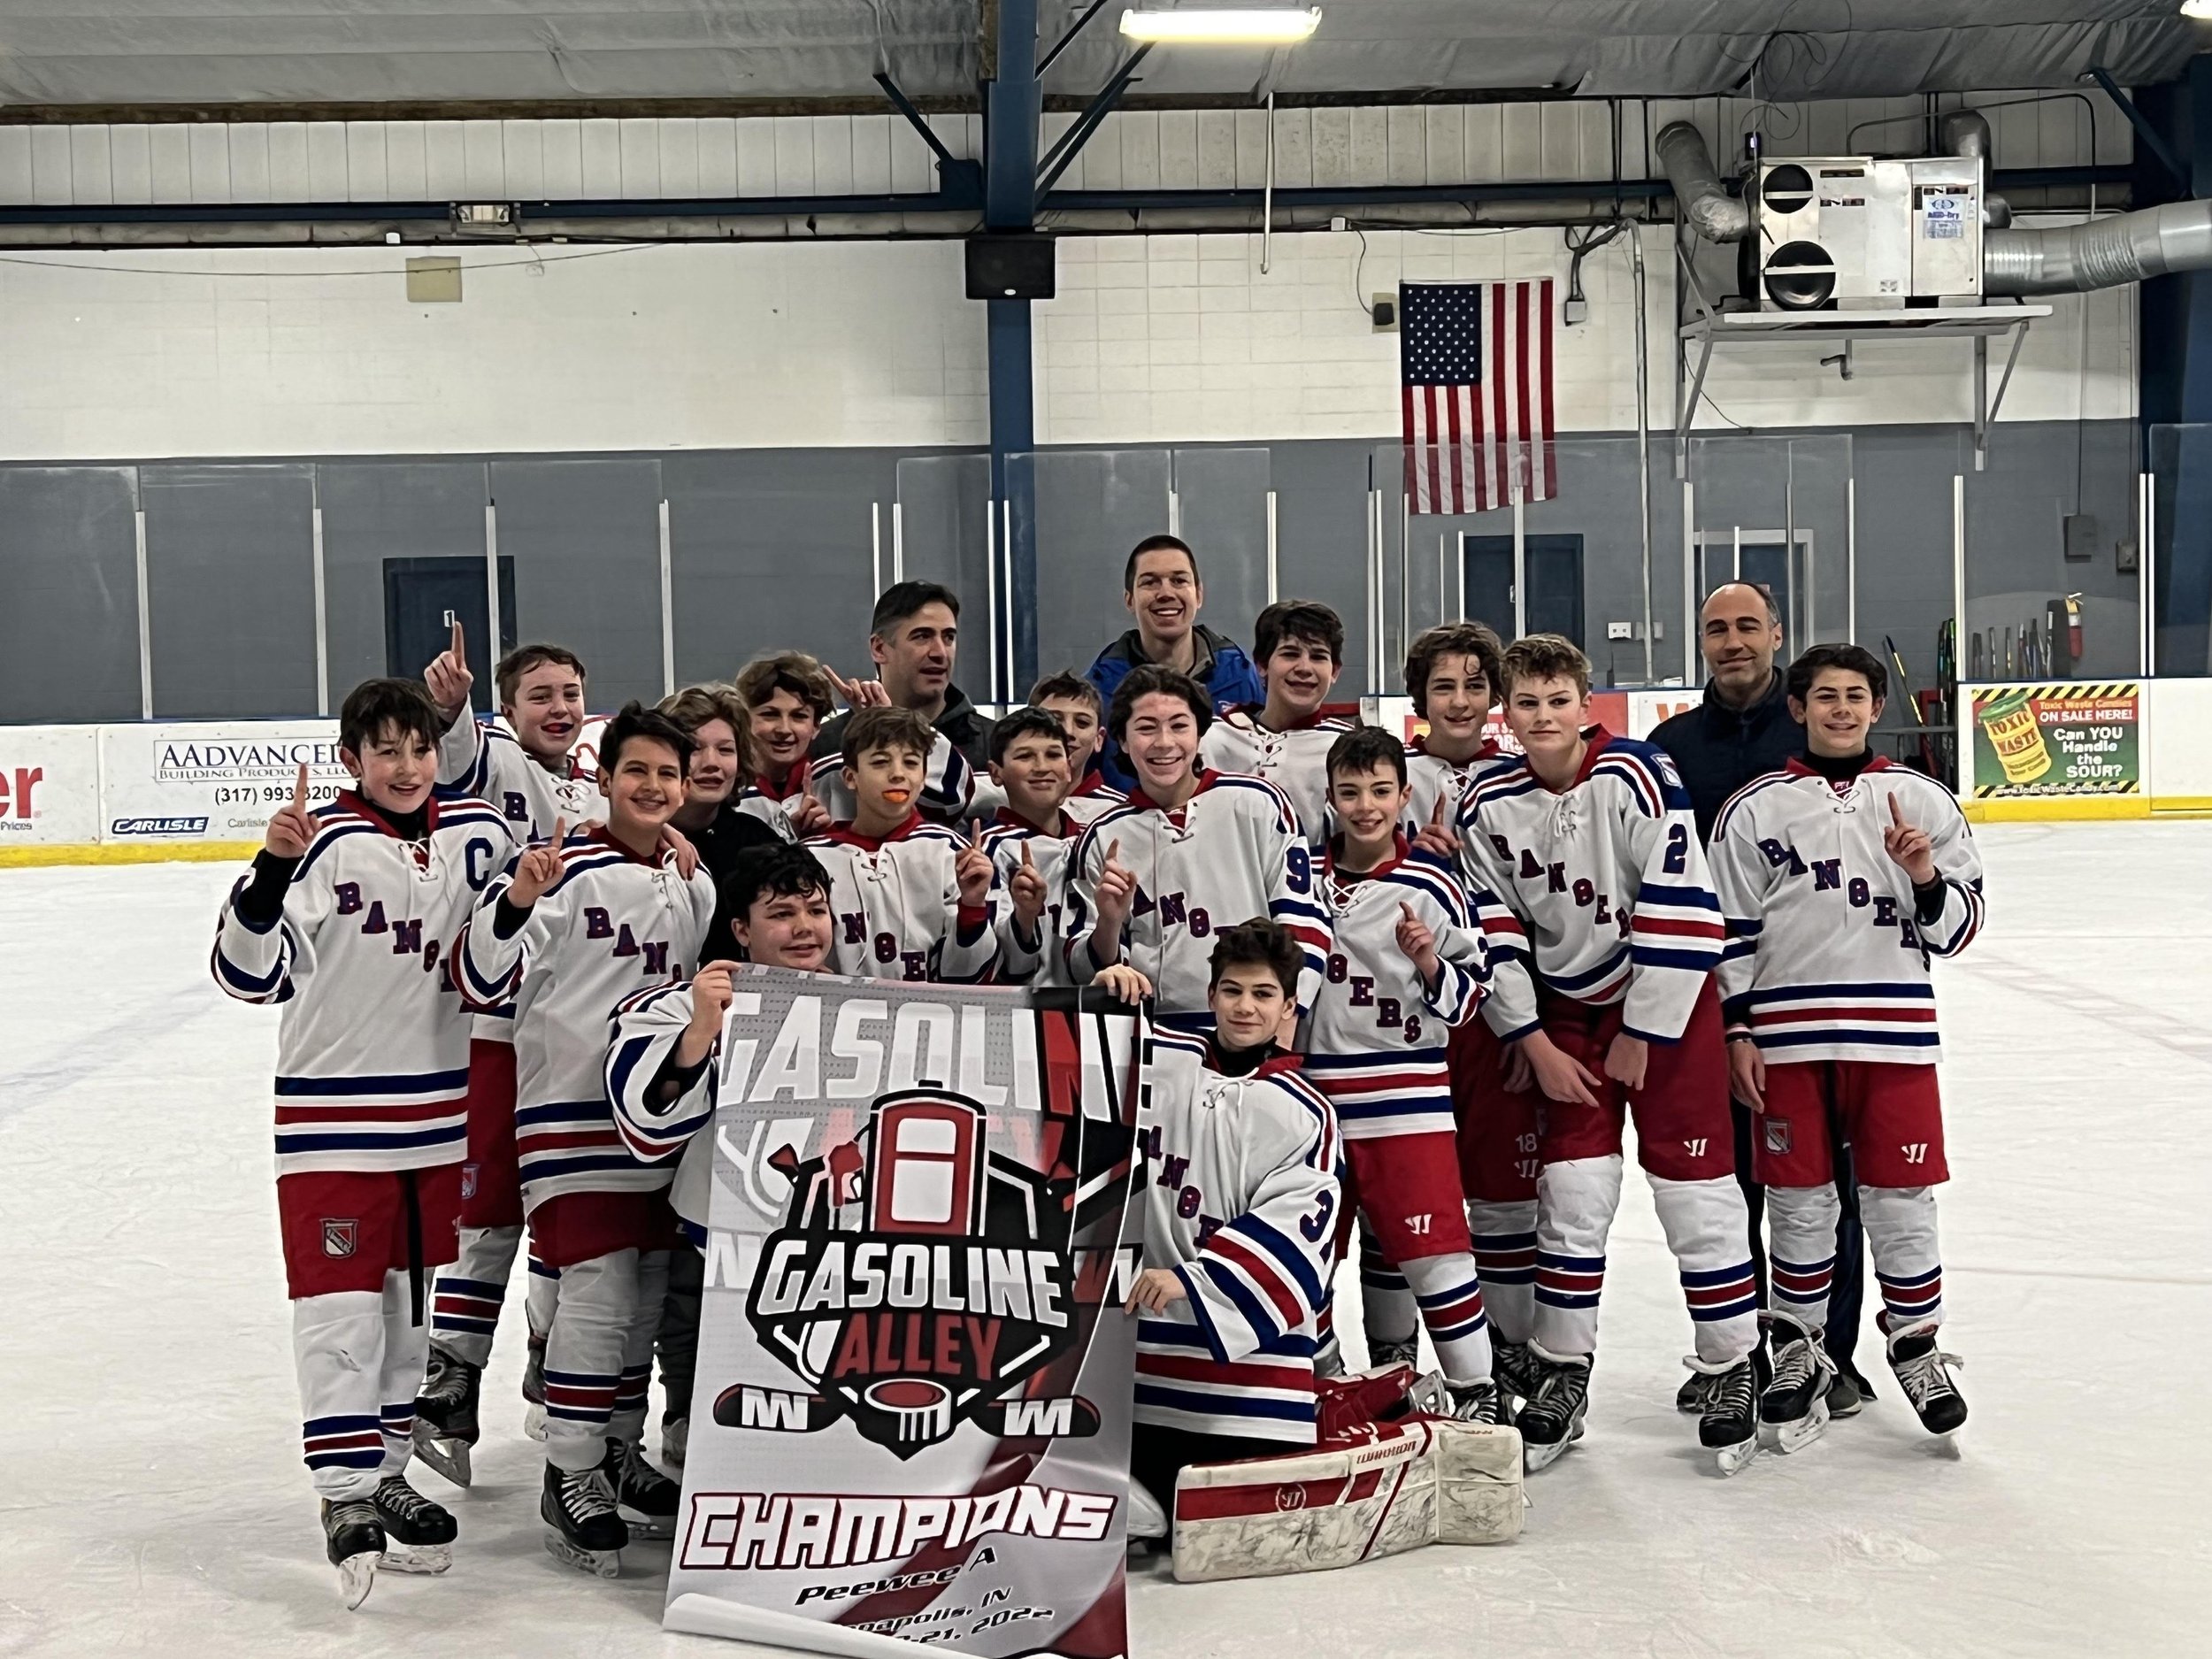  2008 Rangers White - 2022 Gasoline Alley Pee Wee A Champions 